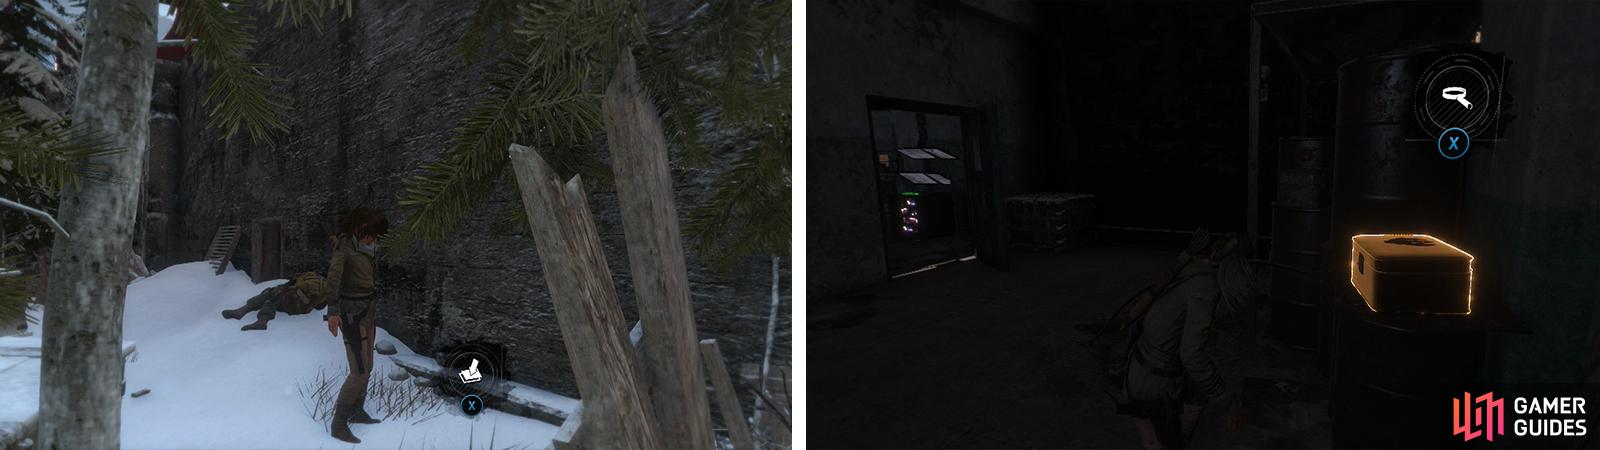 After taking out the enemies loot Survival Cache 10 (left). Inside use the Lockpick to open the door for Relic 09 (right).